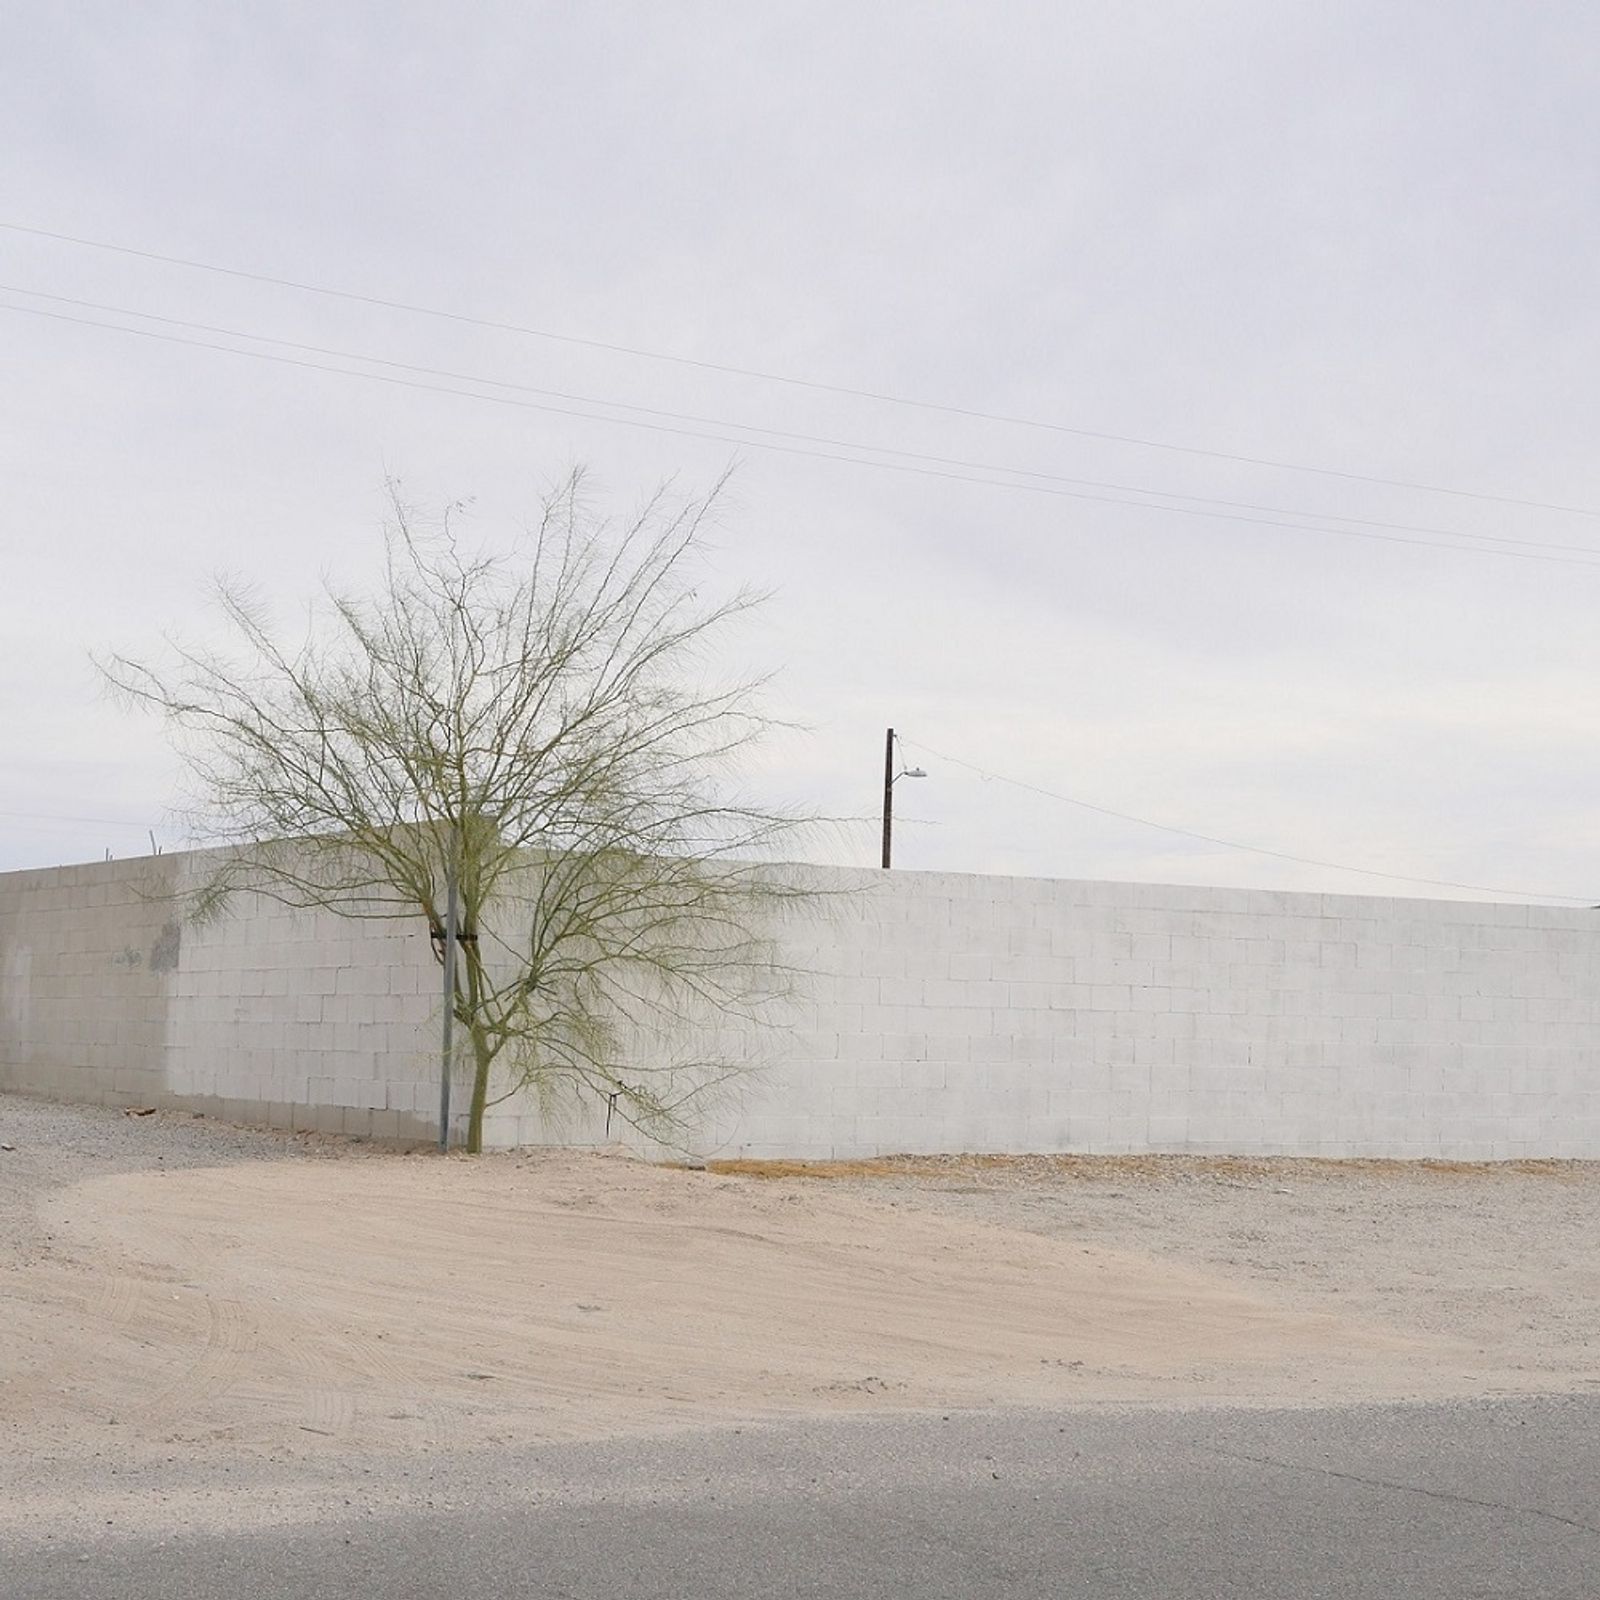 © Emmanuel Monzon - Image from the URBAN SPRAWL-EMPTINESS photography project